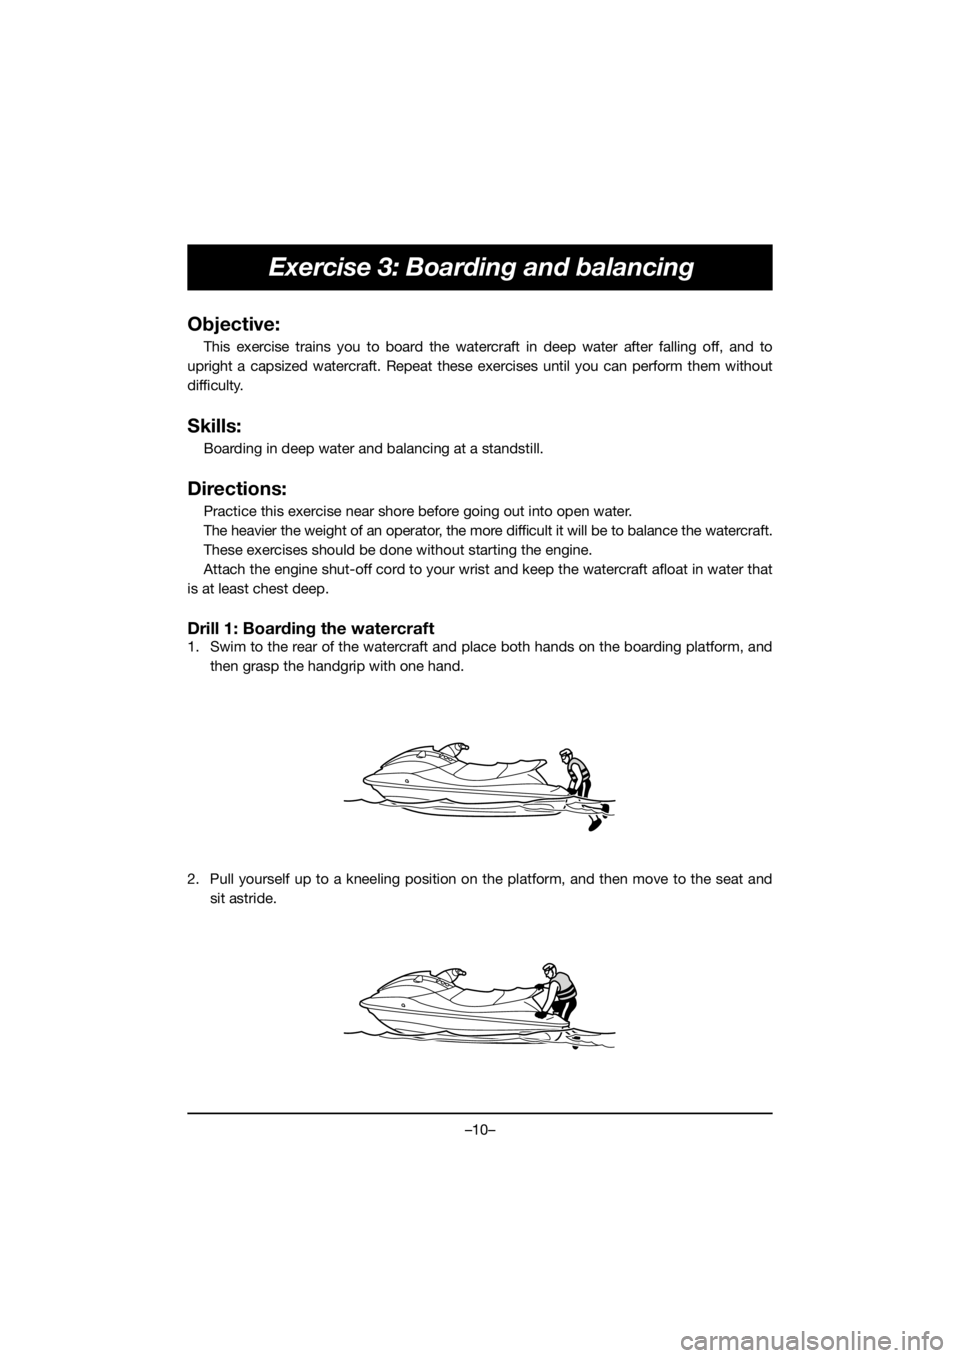 YAMAHA GP1800R SVHO 2020  Bruksanvisningar (in Swedish) –10–
Exercise 3: Boarding and balancing
Objective:
This exercise trains you to board the watercraft in deep water after falling off, and to
upright a capsized watercraft. Repeat these exercises un